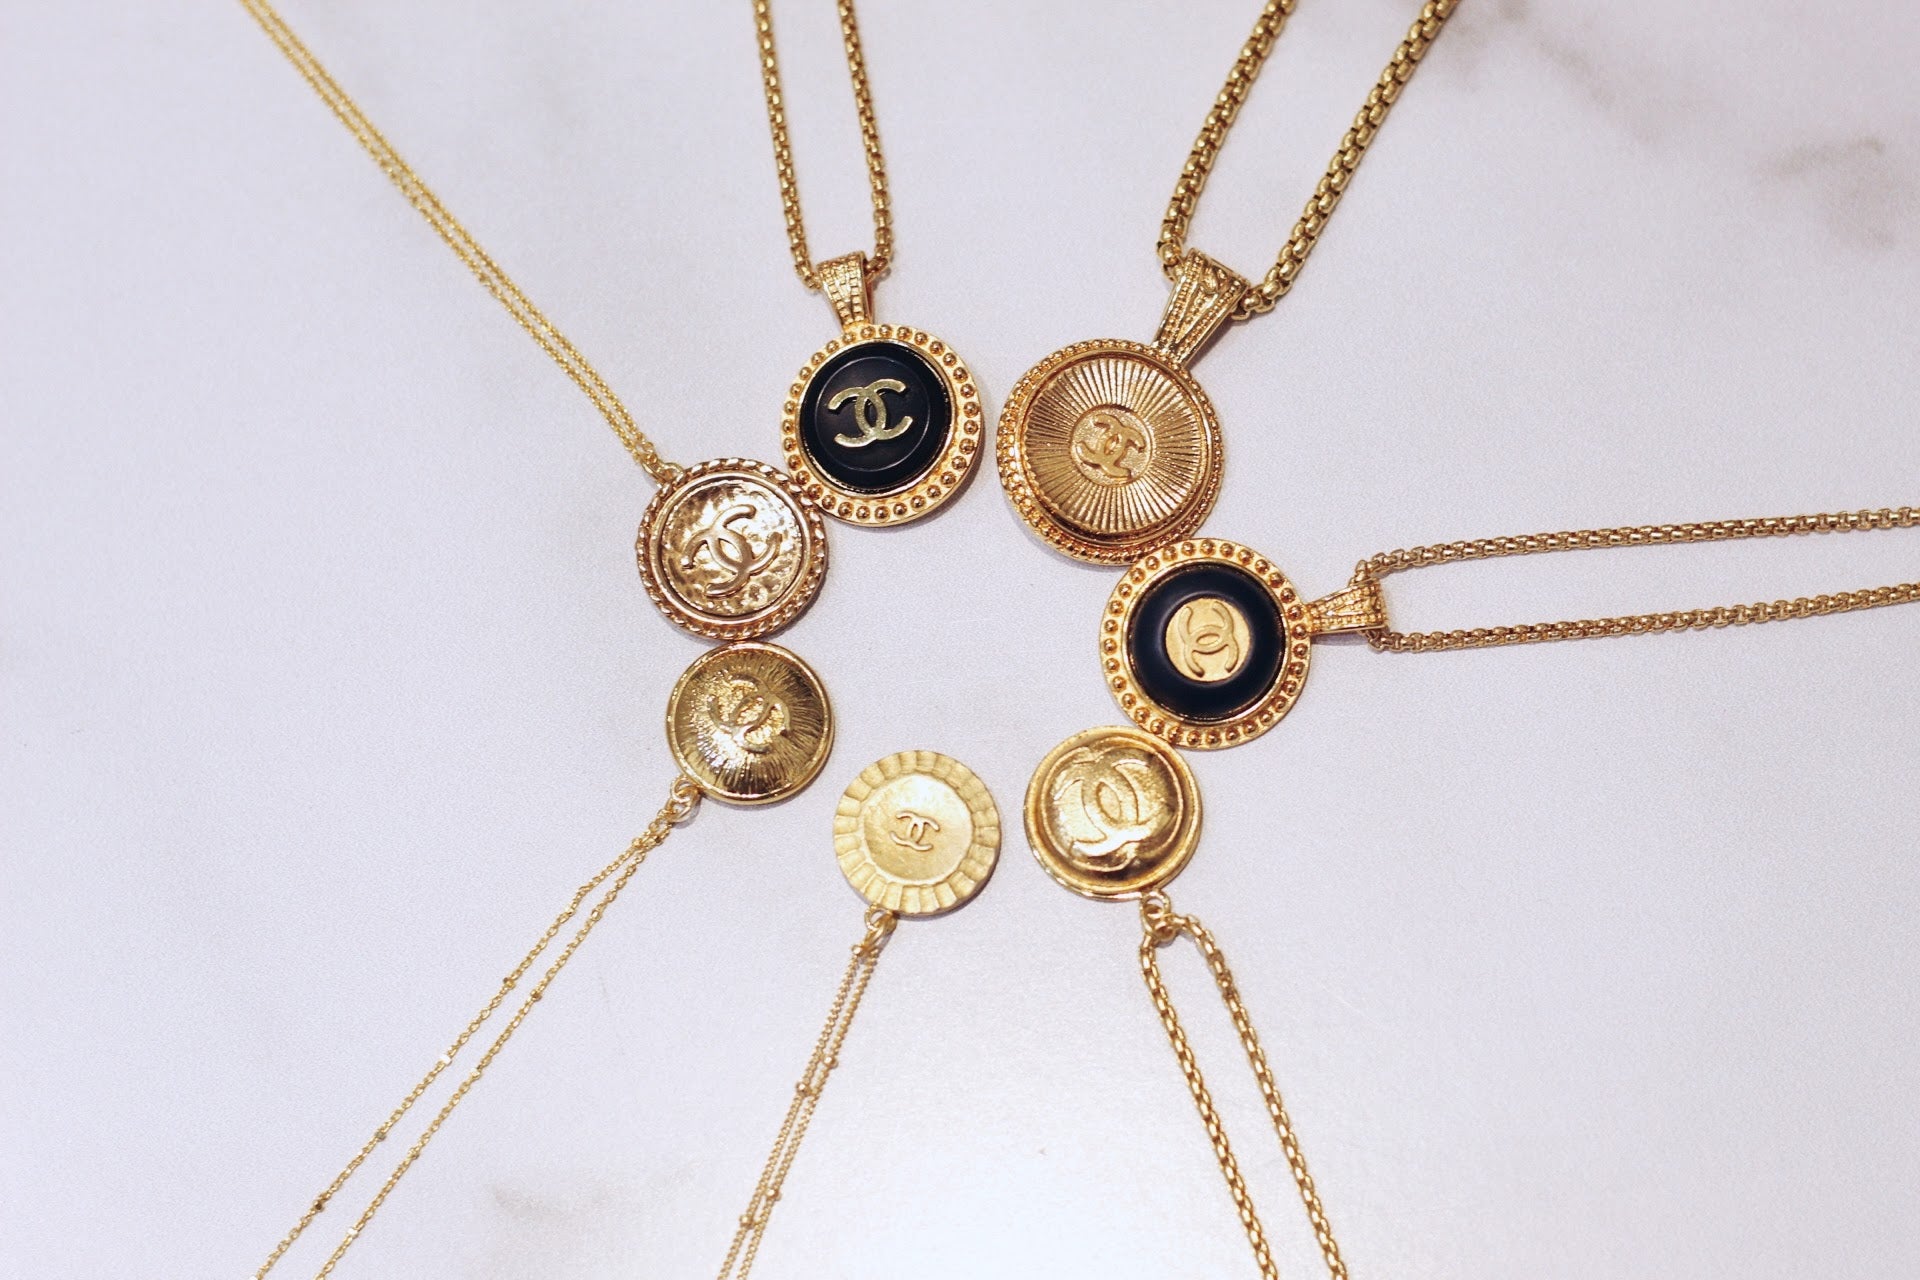 NEW vintage Chanel button necklaces! $110 each! To purchase